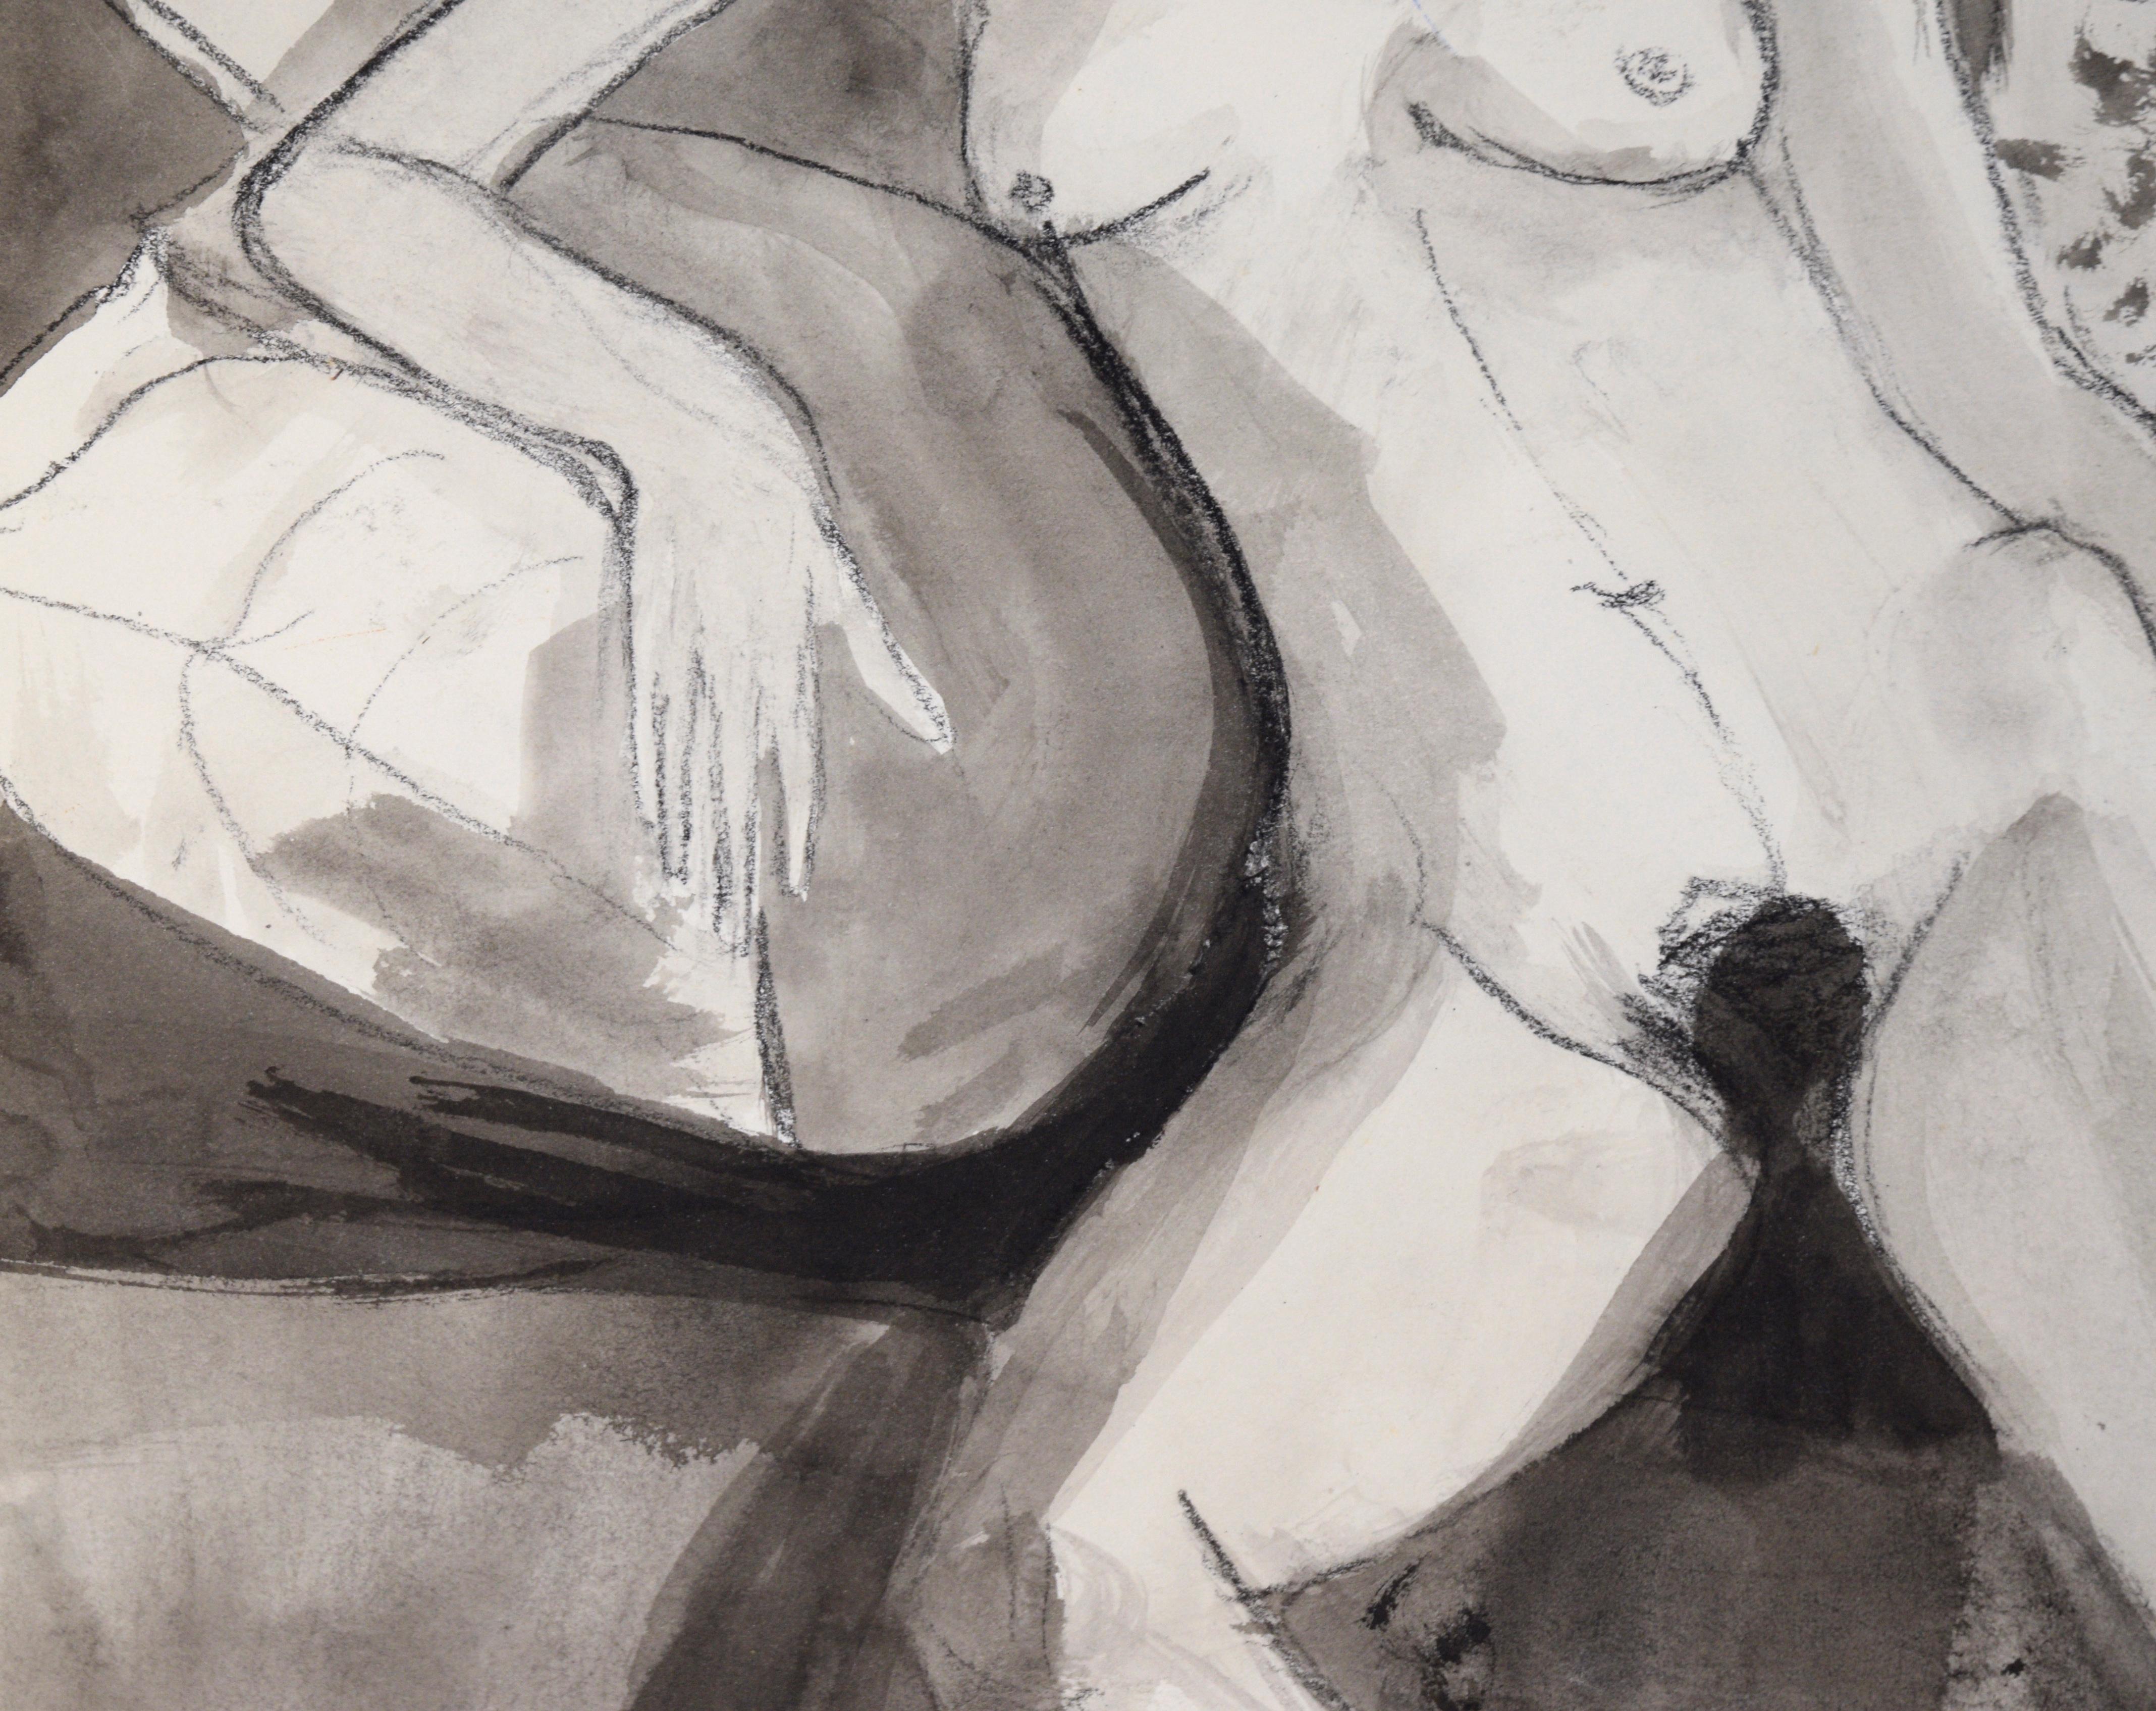 Nude Woman on Striped Chair #2 in Charcoal and Gouache on Paper

Black and white painting of a woman by acclaimed bluegrass musician Katherine 